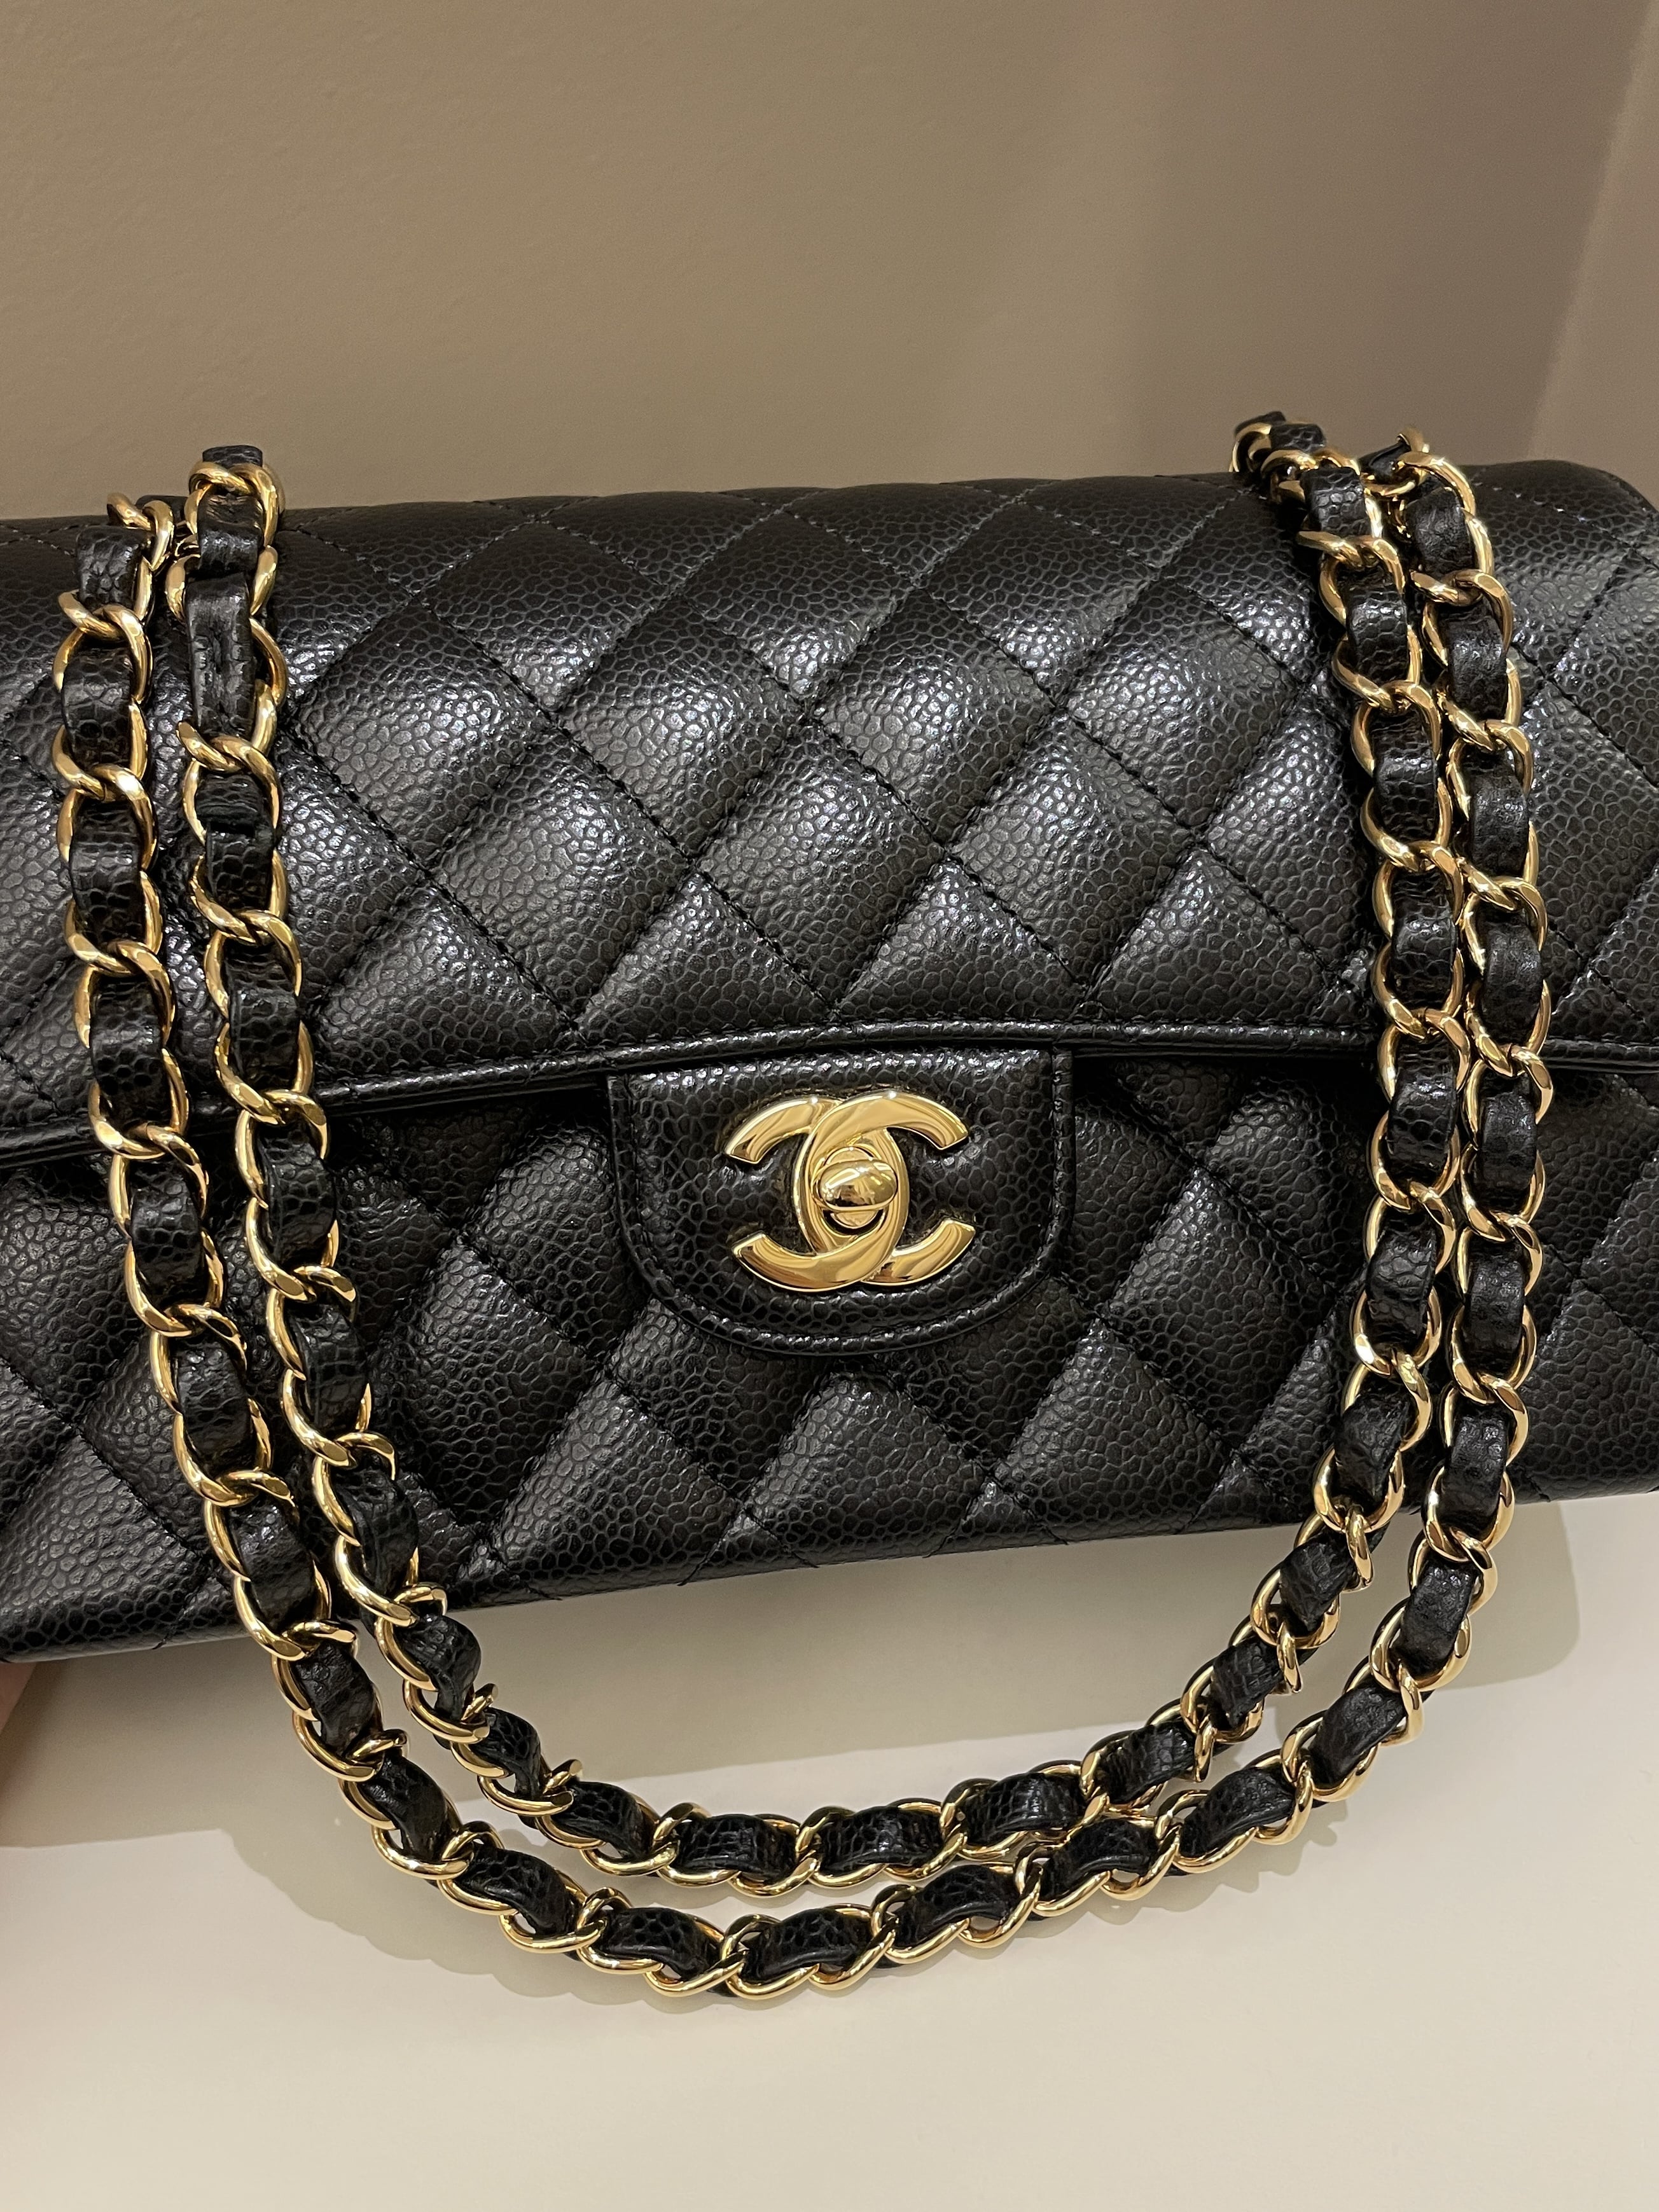 Chanel Black Classic Small Double Flap Bag